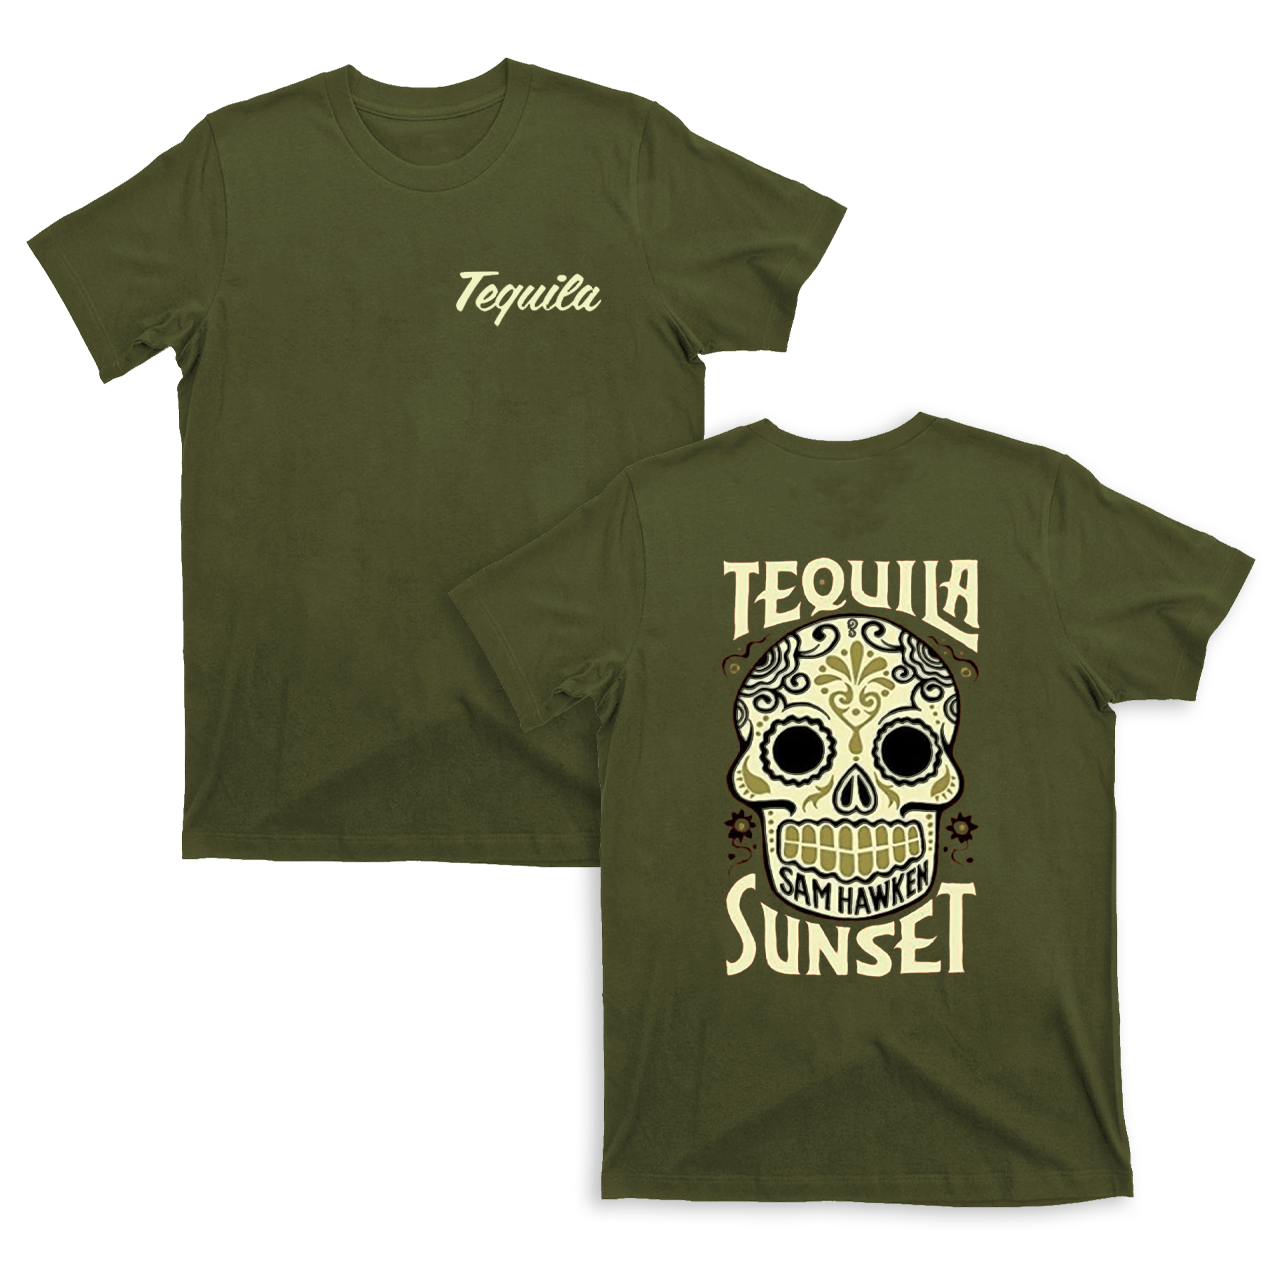 Tequila Sunset T-Shirts